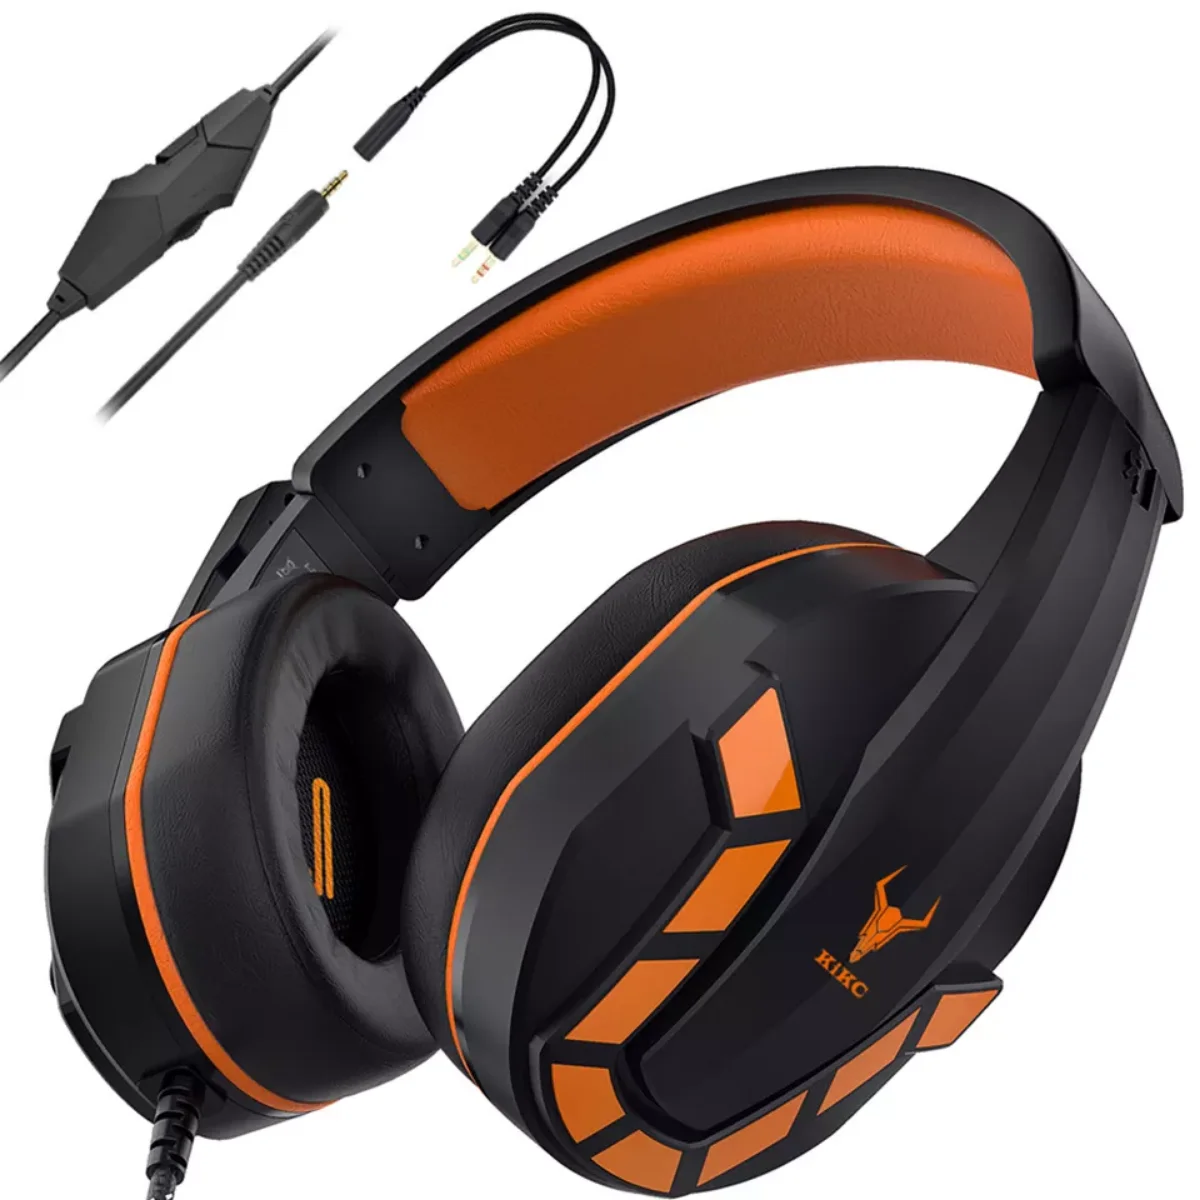 

Kikc Headphones 7.1 Surround Gaming Earphones Accessories Boy Gaming Headset With Removable Microphone, Orange